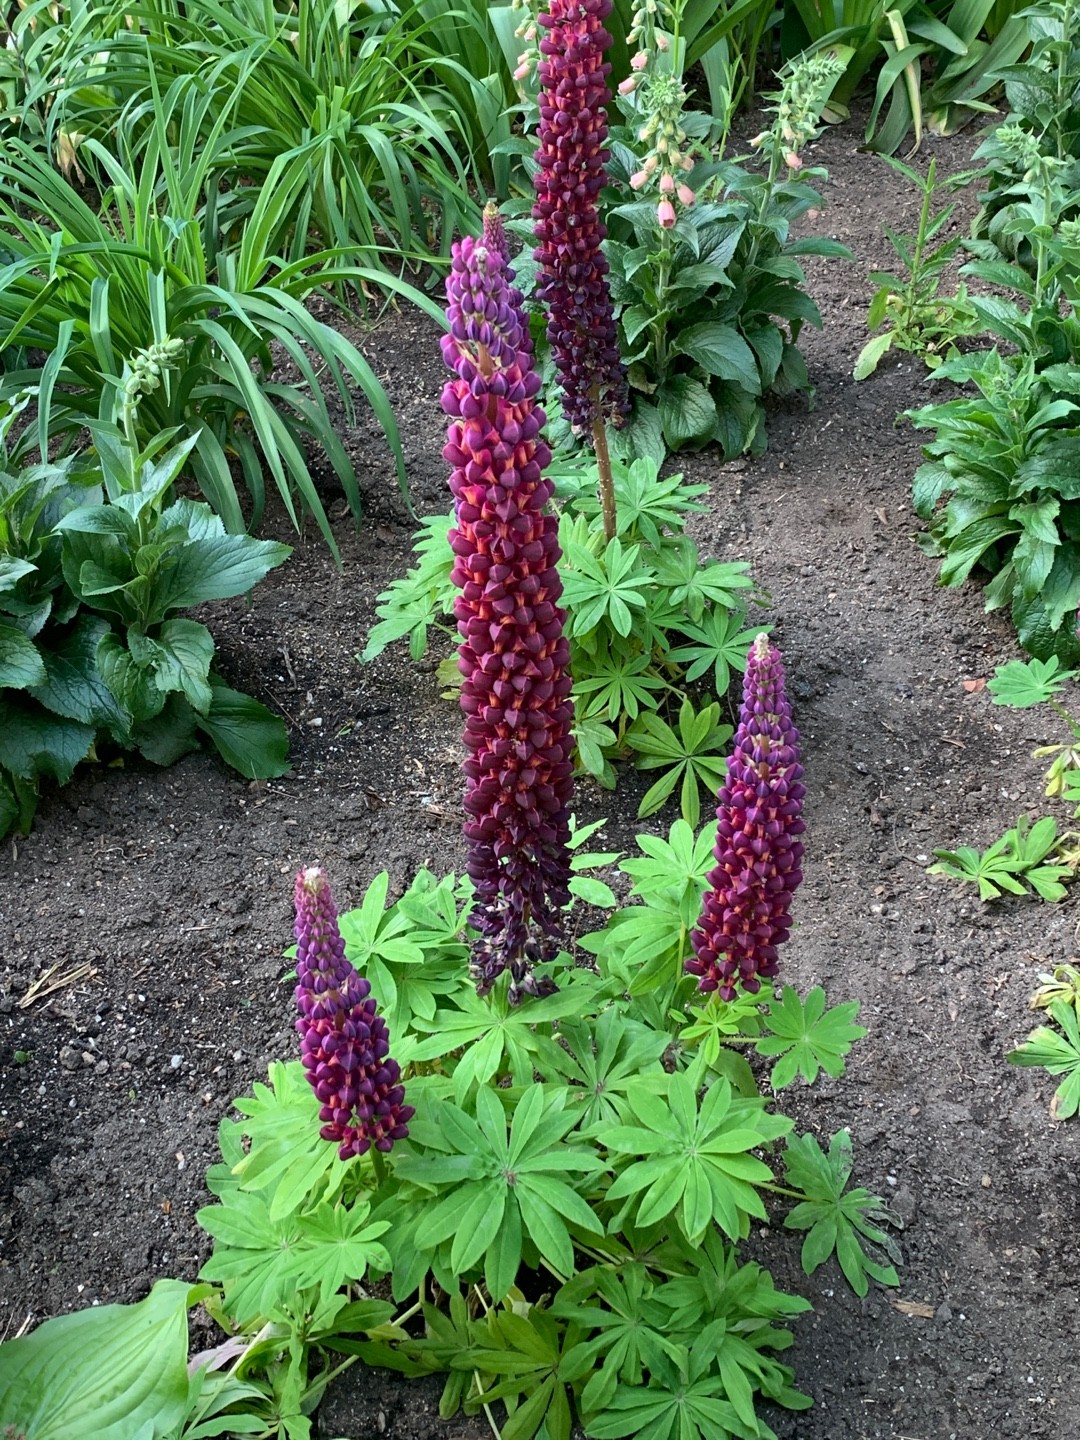 Lupin Persian Slipper | Plant For Sale | Free UK Delivery